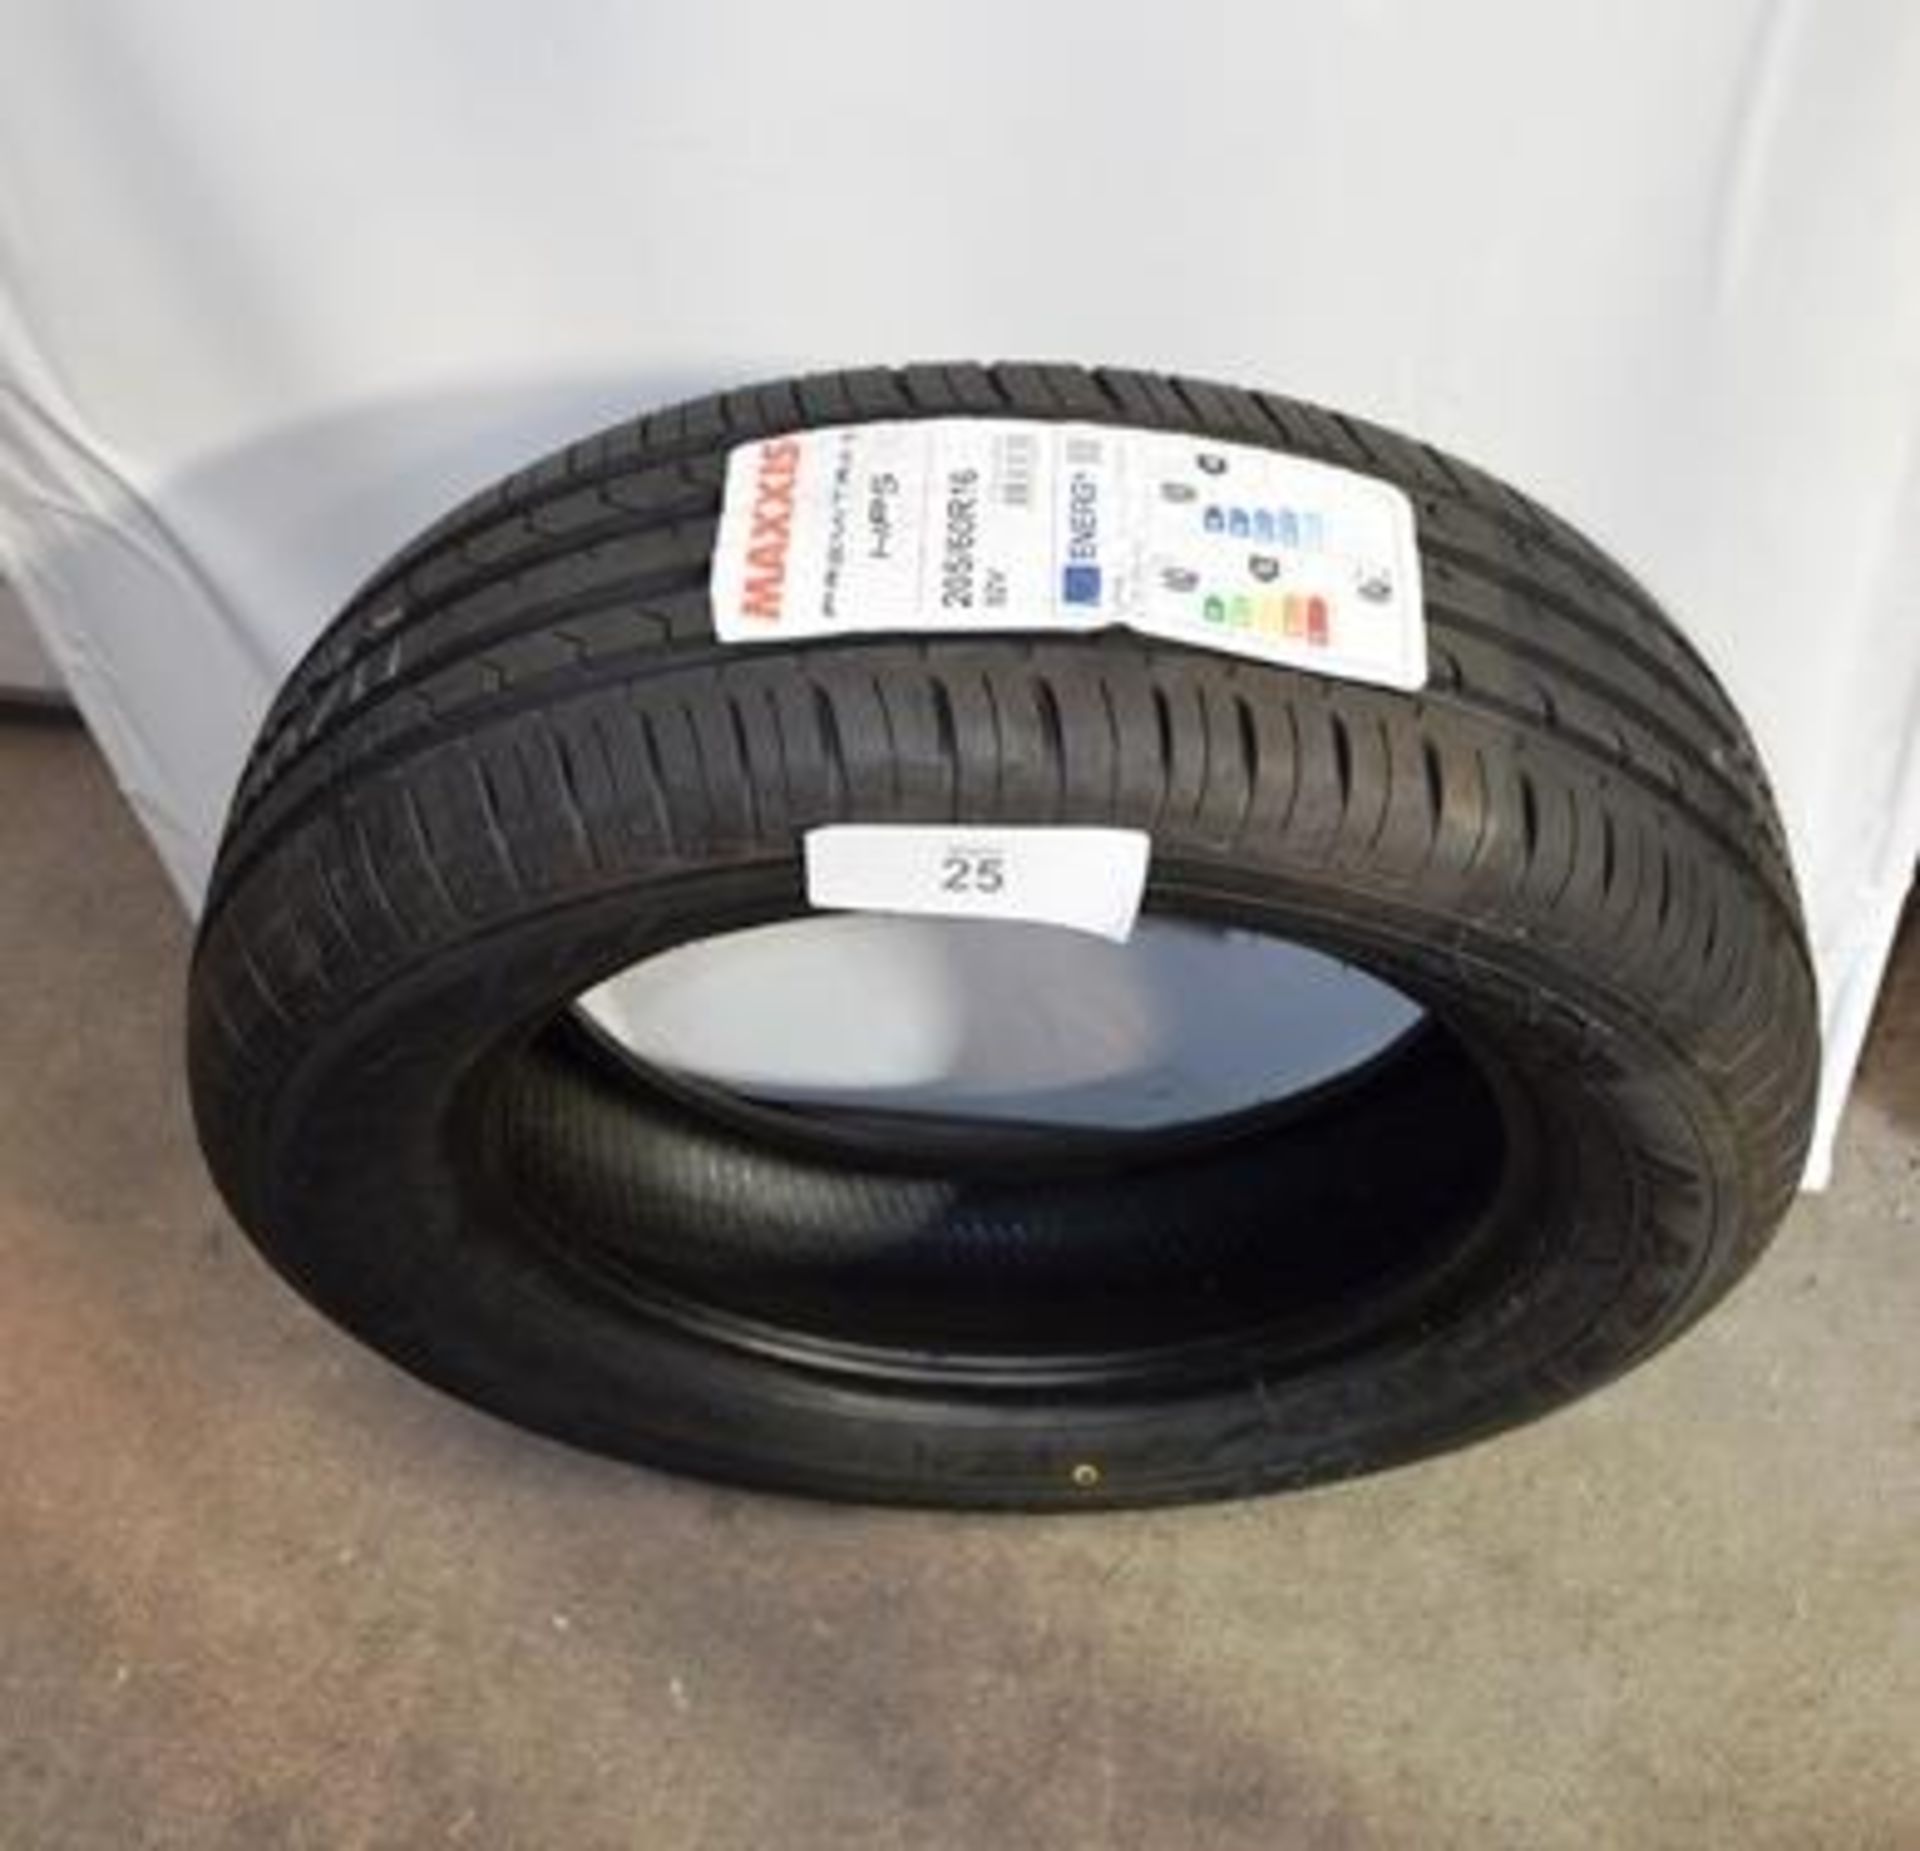 1 x Maxxis Premitra 5 HP5 tyre, size 205/60R16 92V - New with label (GS2)